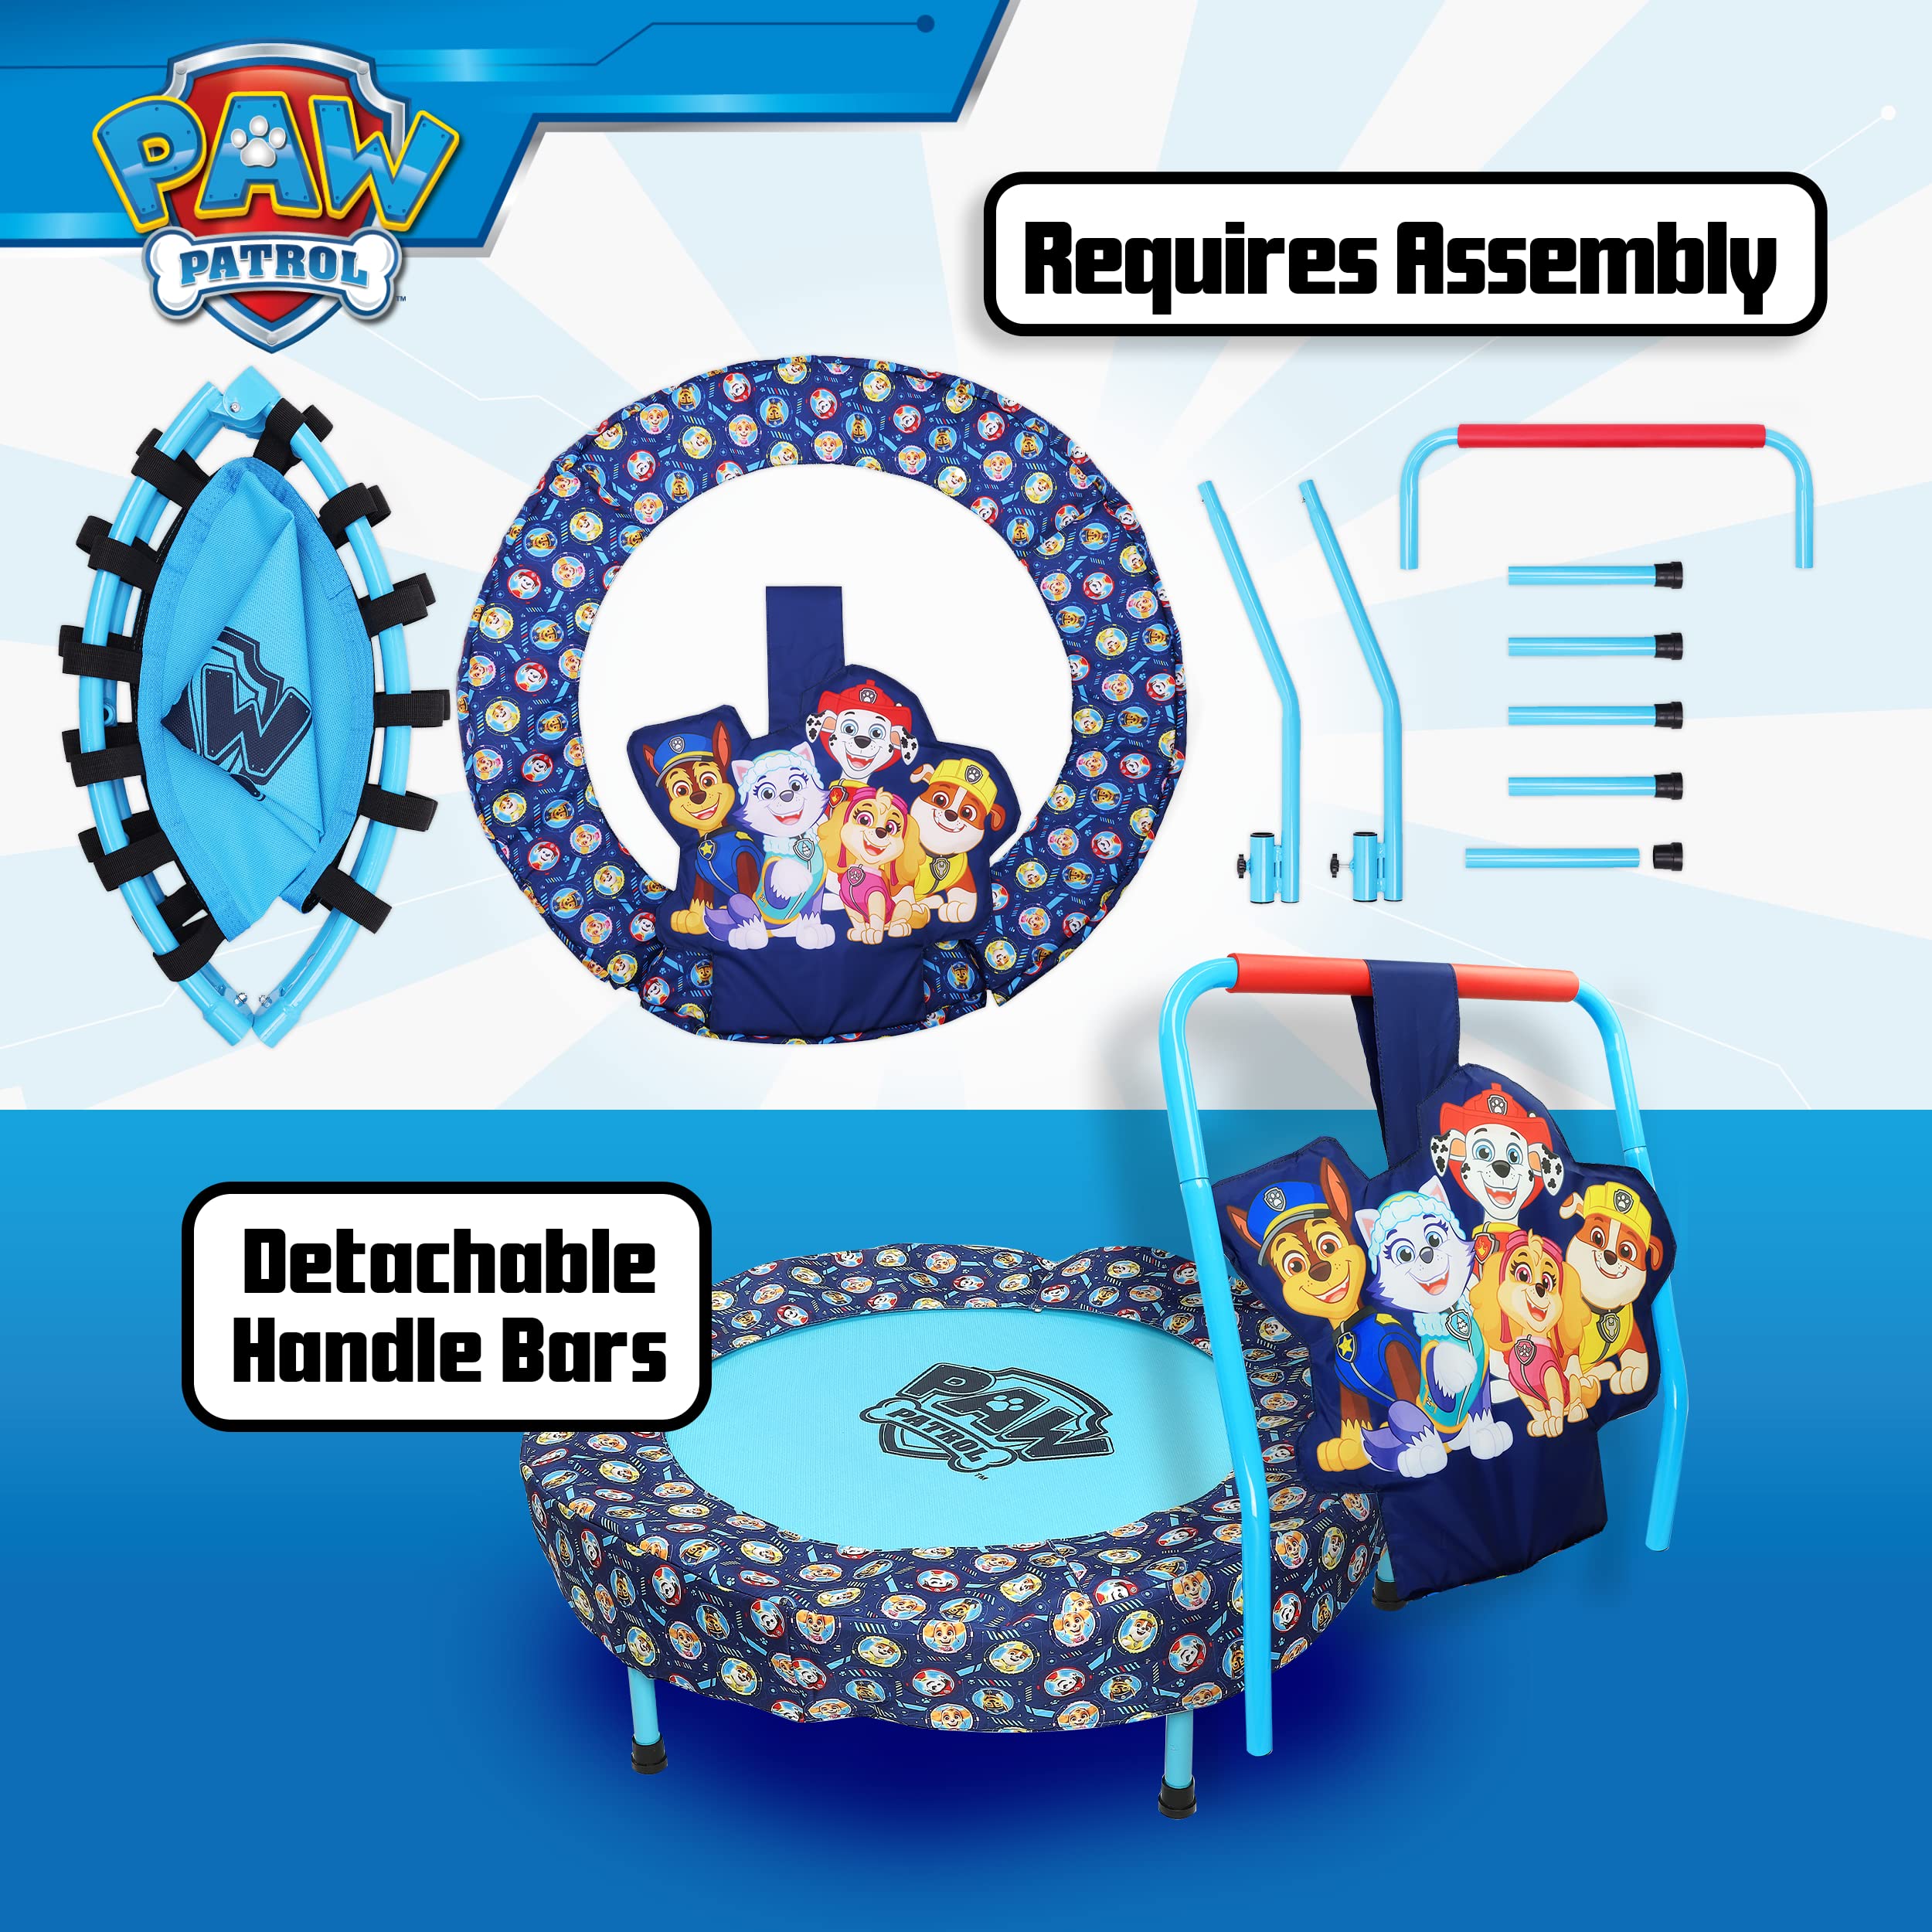 PAW Patrol Mini Trampoline, Indoor Kids Trampoline for Toddlers with Handle, Features Everest, Chase, Marshall, Skye and Rubble, Multi